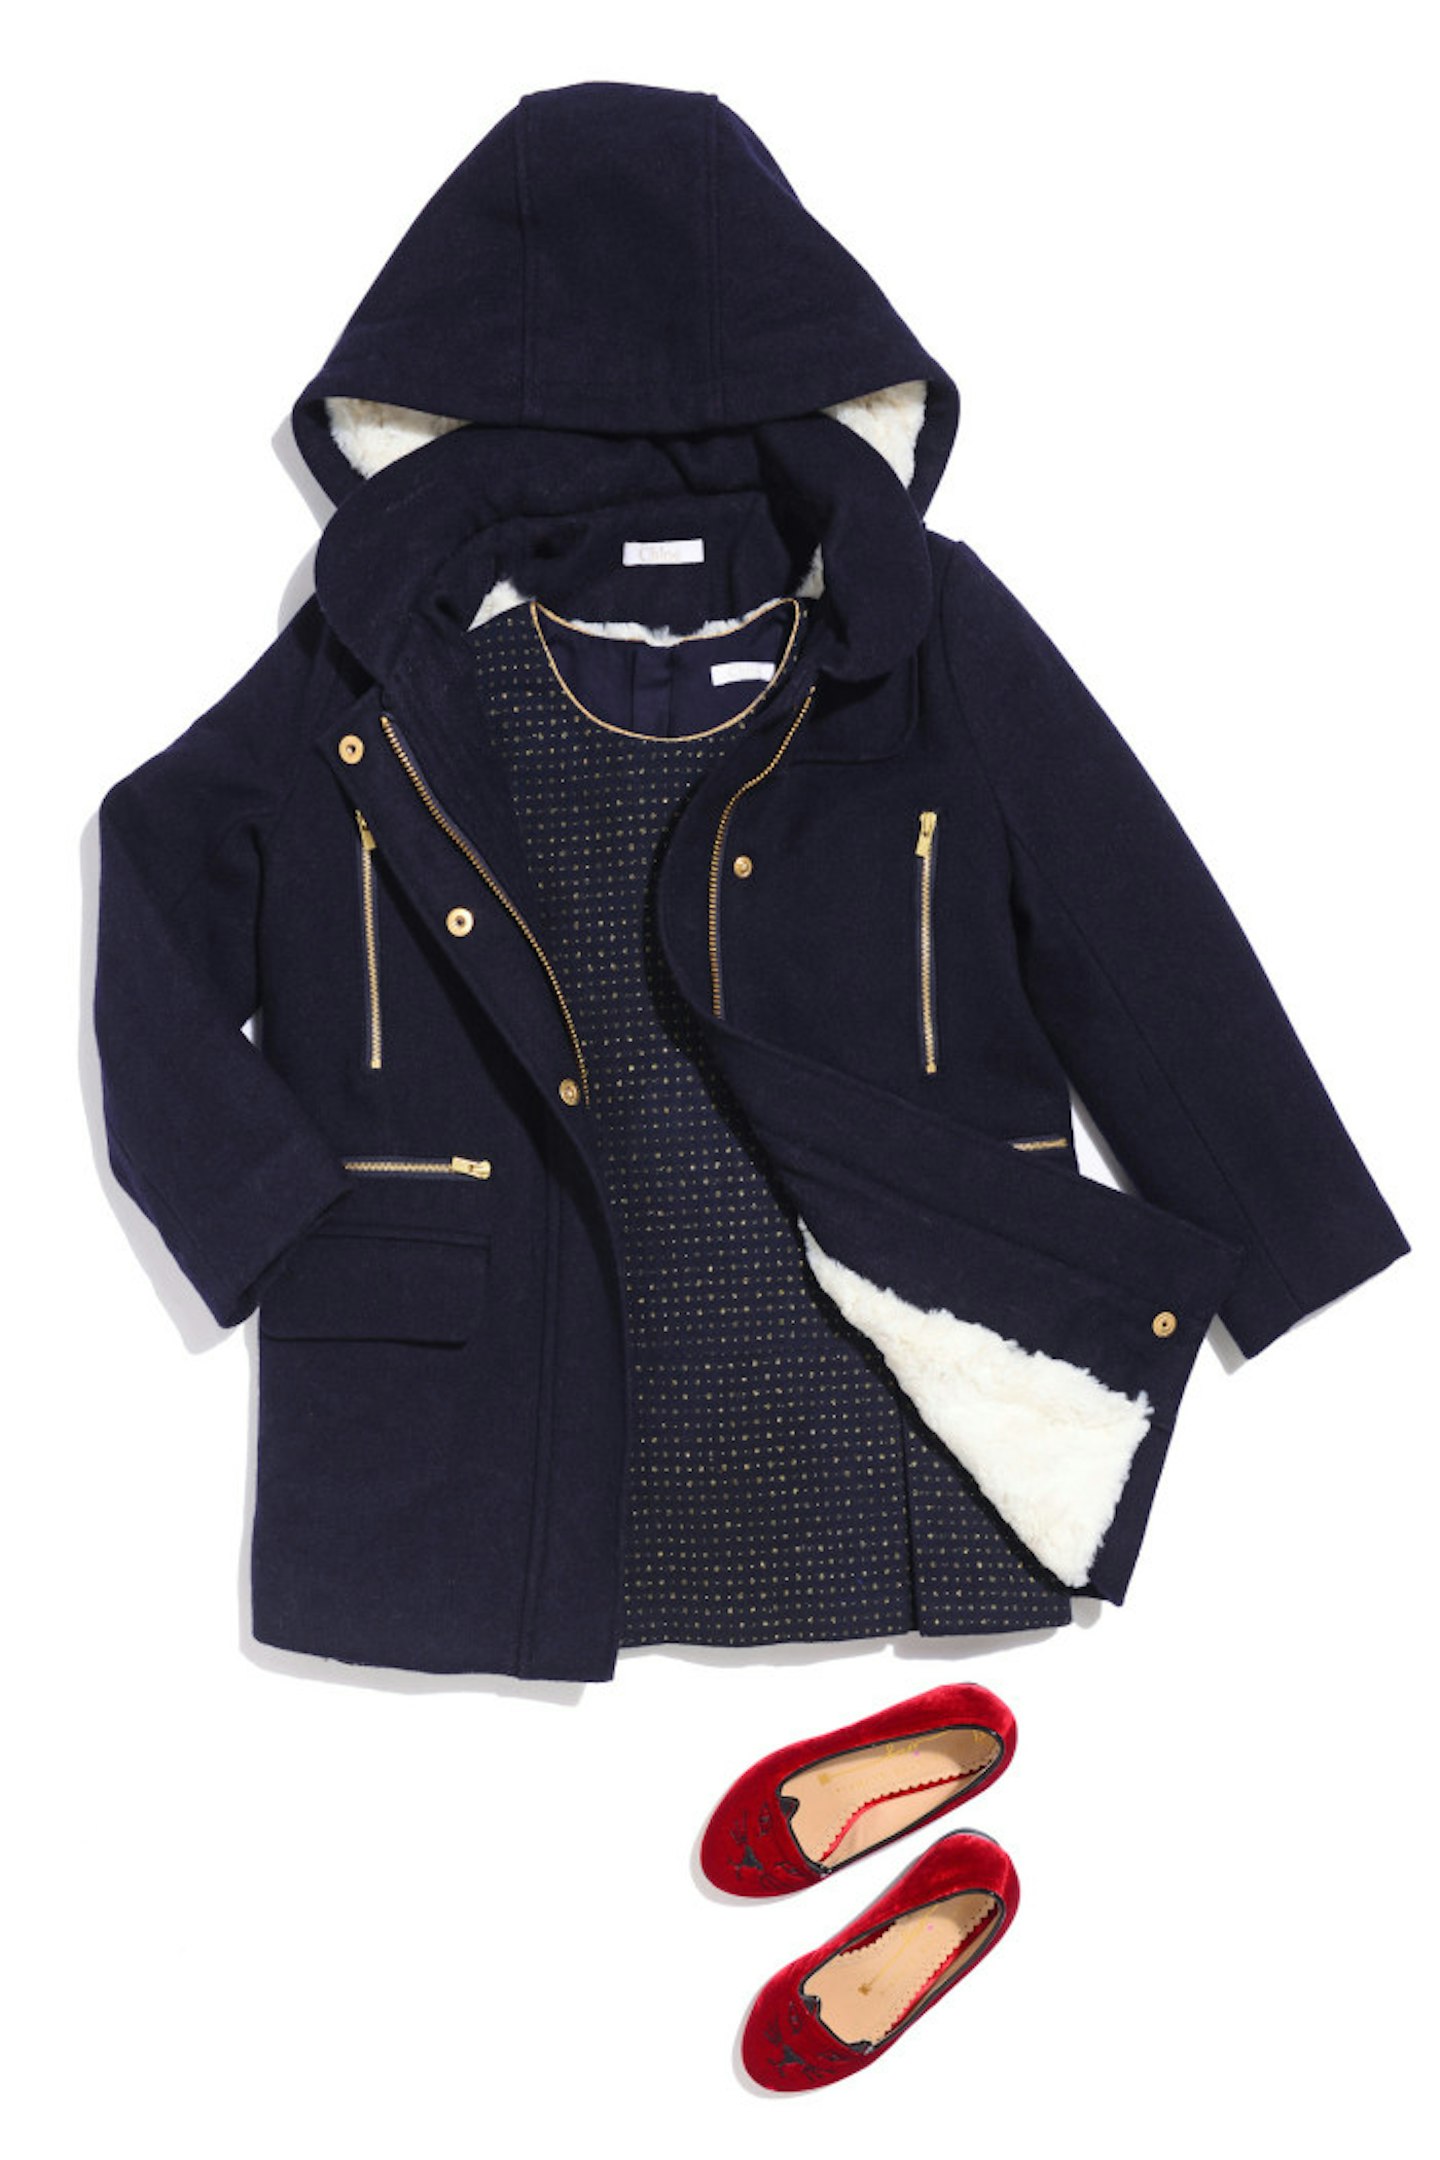 Chloe navy duffle coat with a Chloe navy/gold dress and Charlotte Olympia red pumps